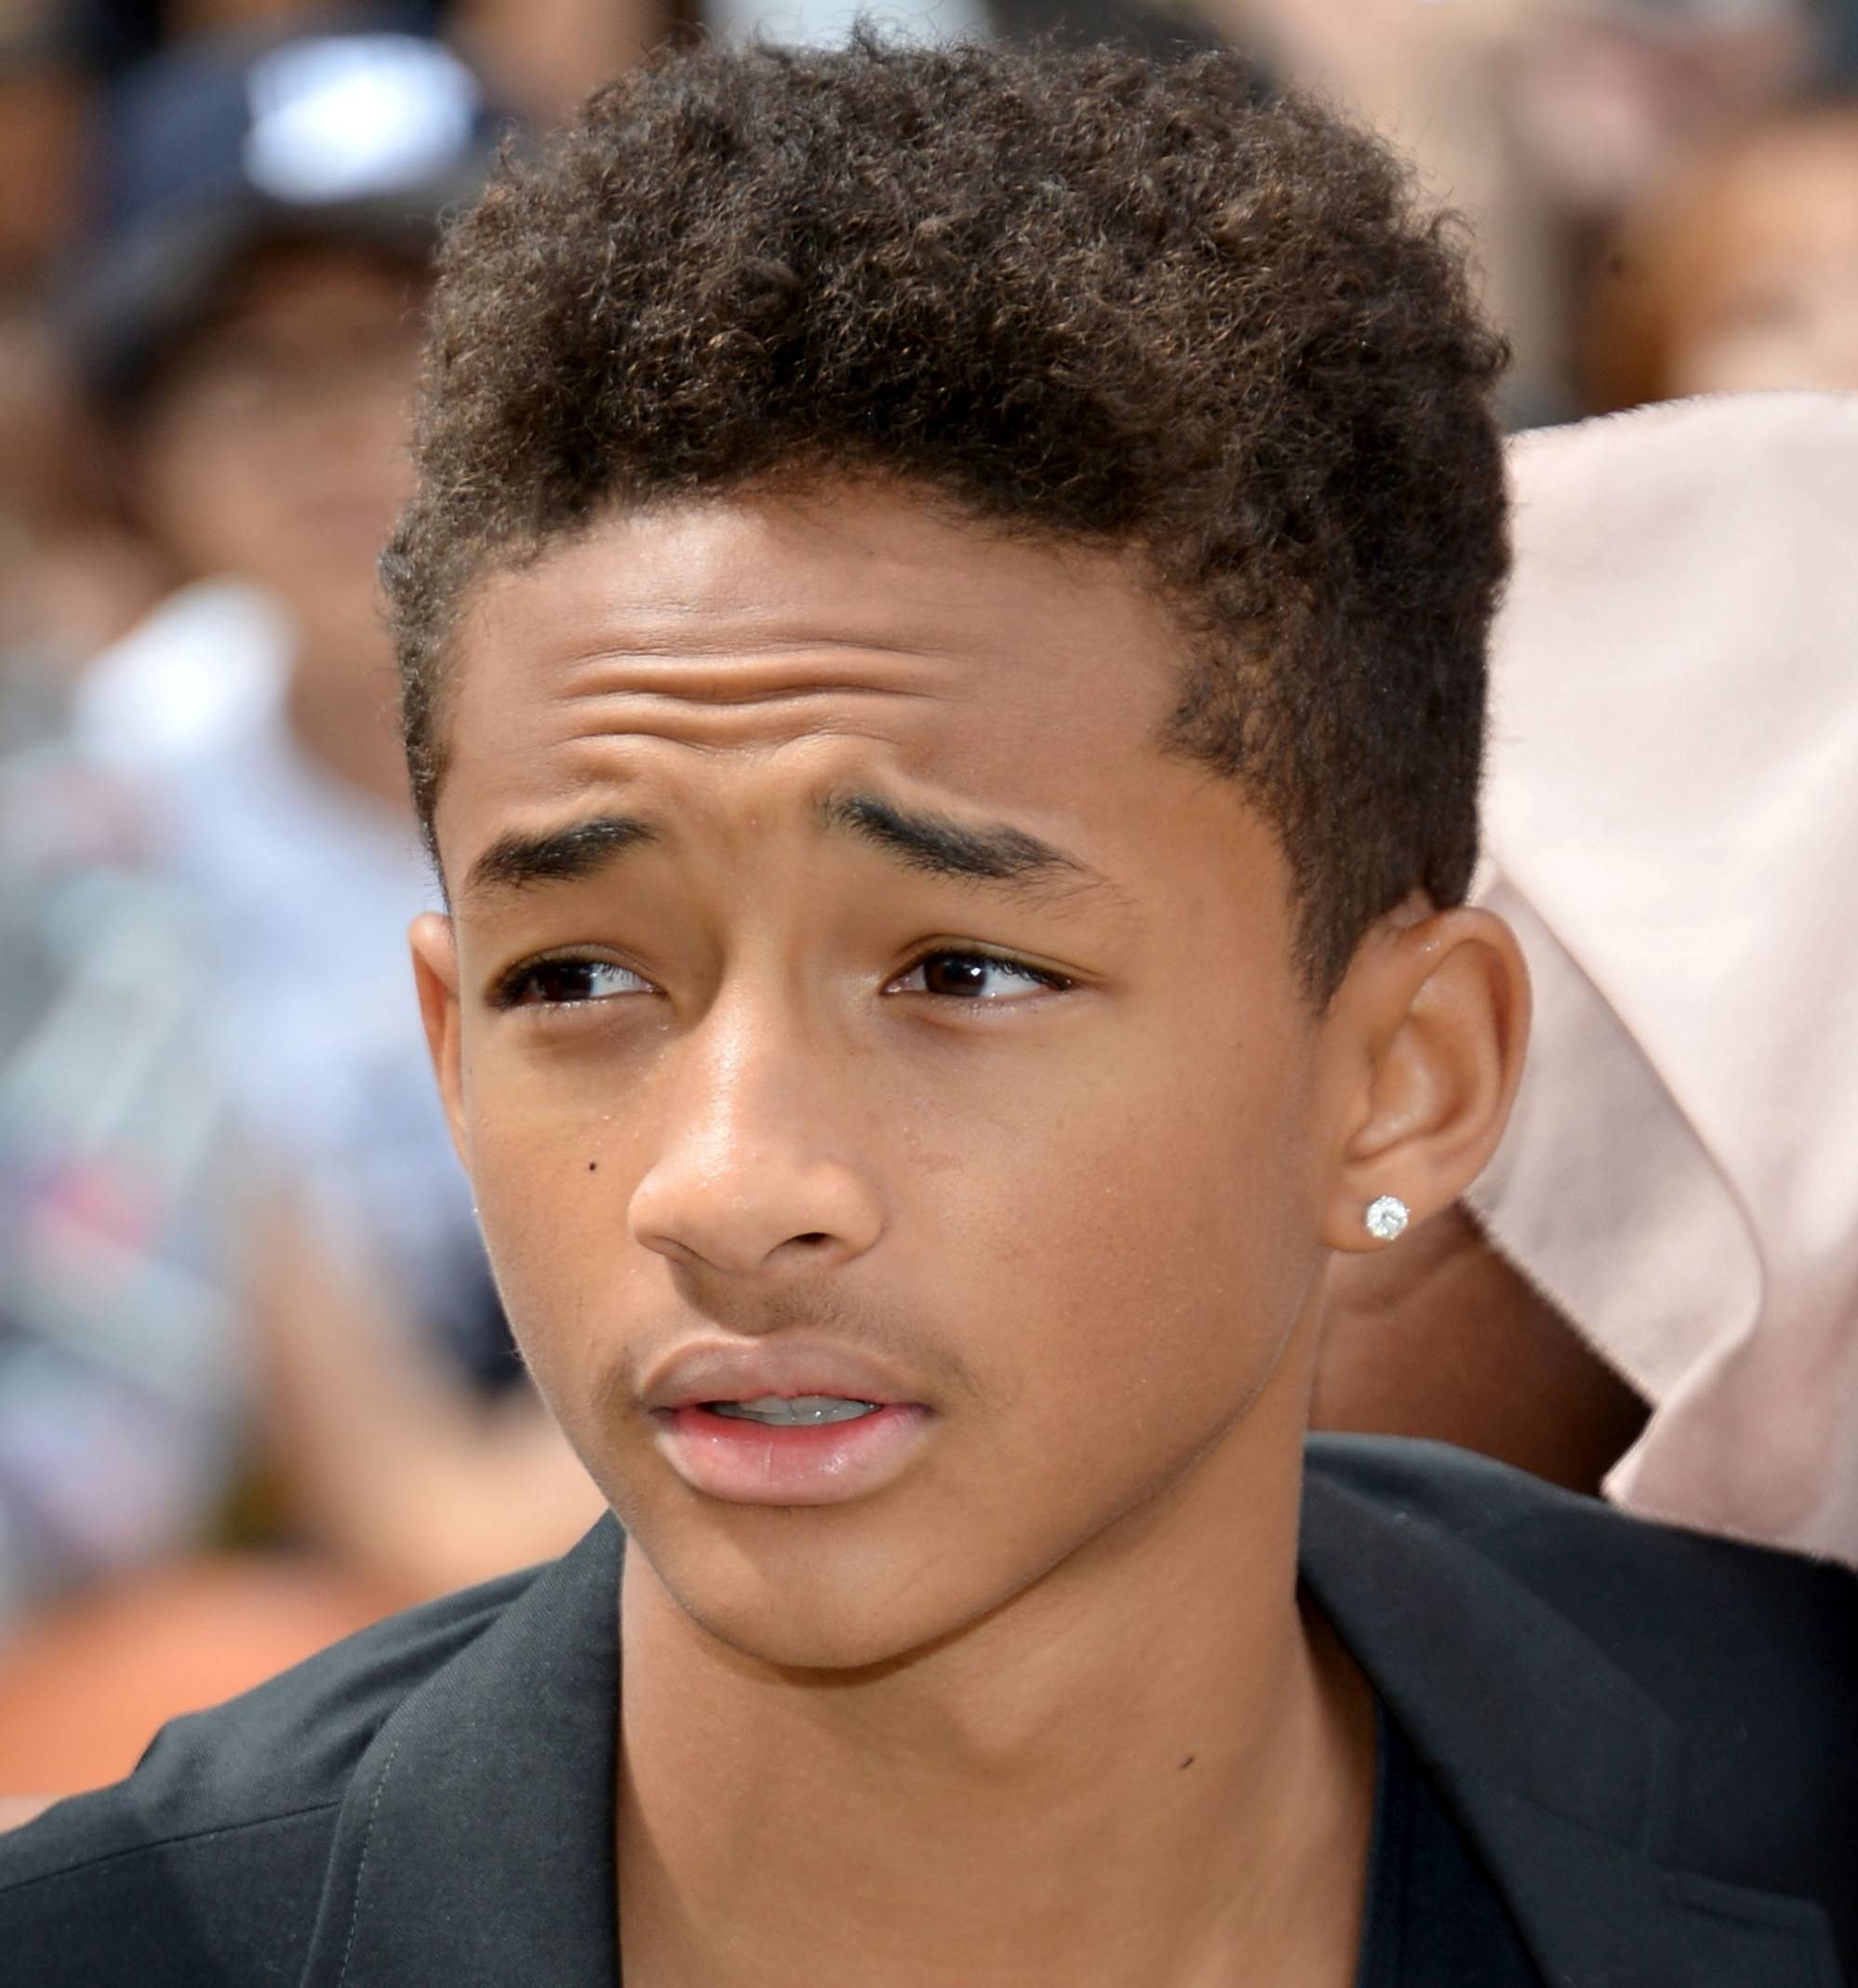 Jaden Smith Backgrounds, Compatible - PC, Mobile, Gadgets| 1997x2137 px